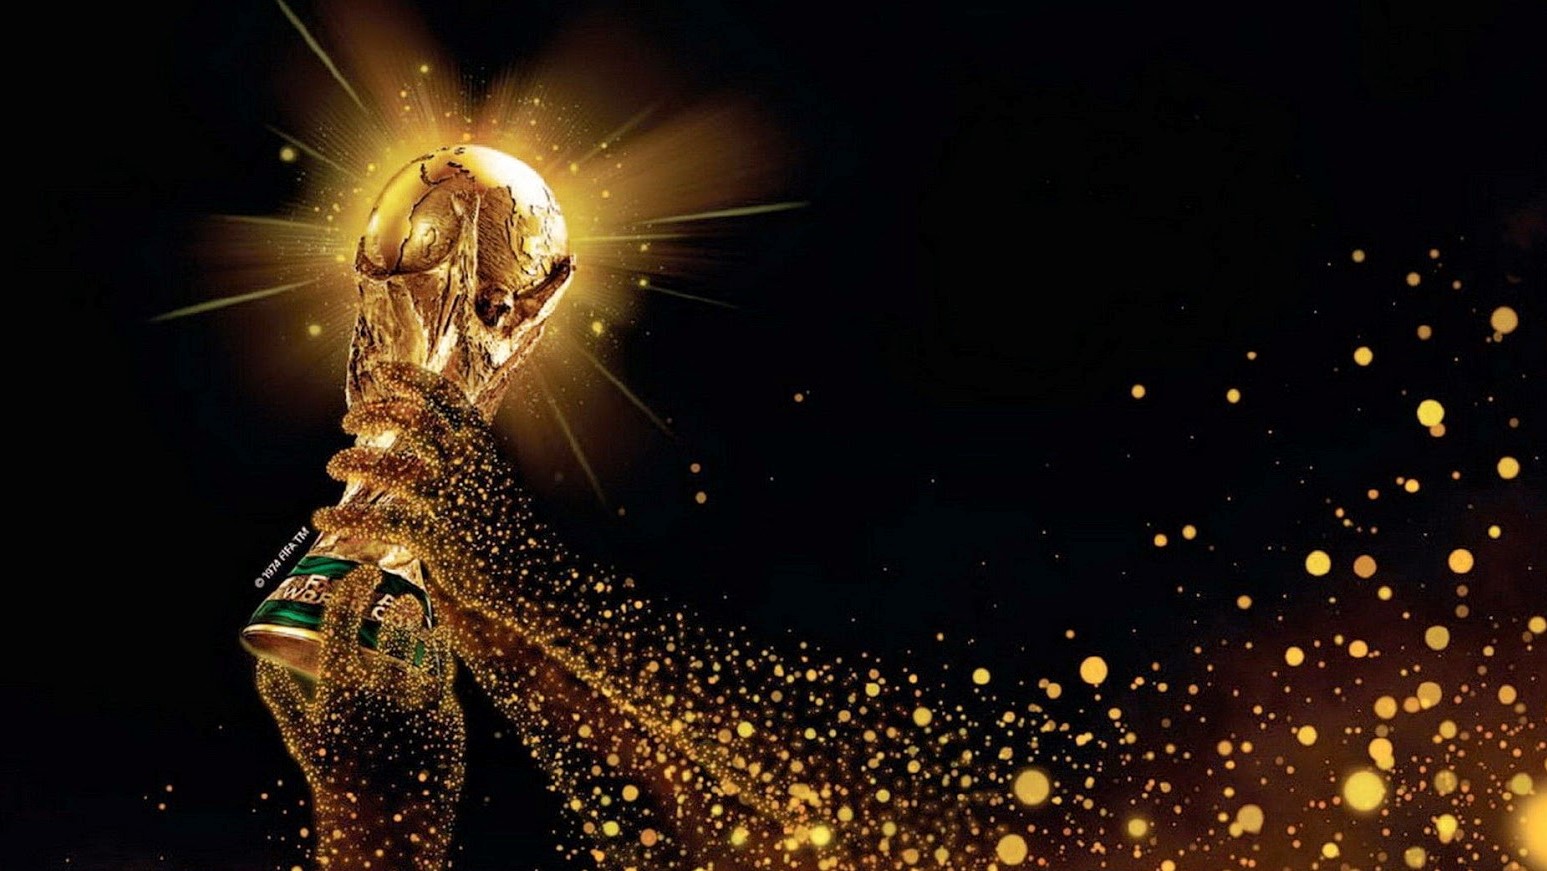 Fifa Worldcup HD Wallpaper And Image